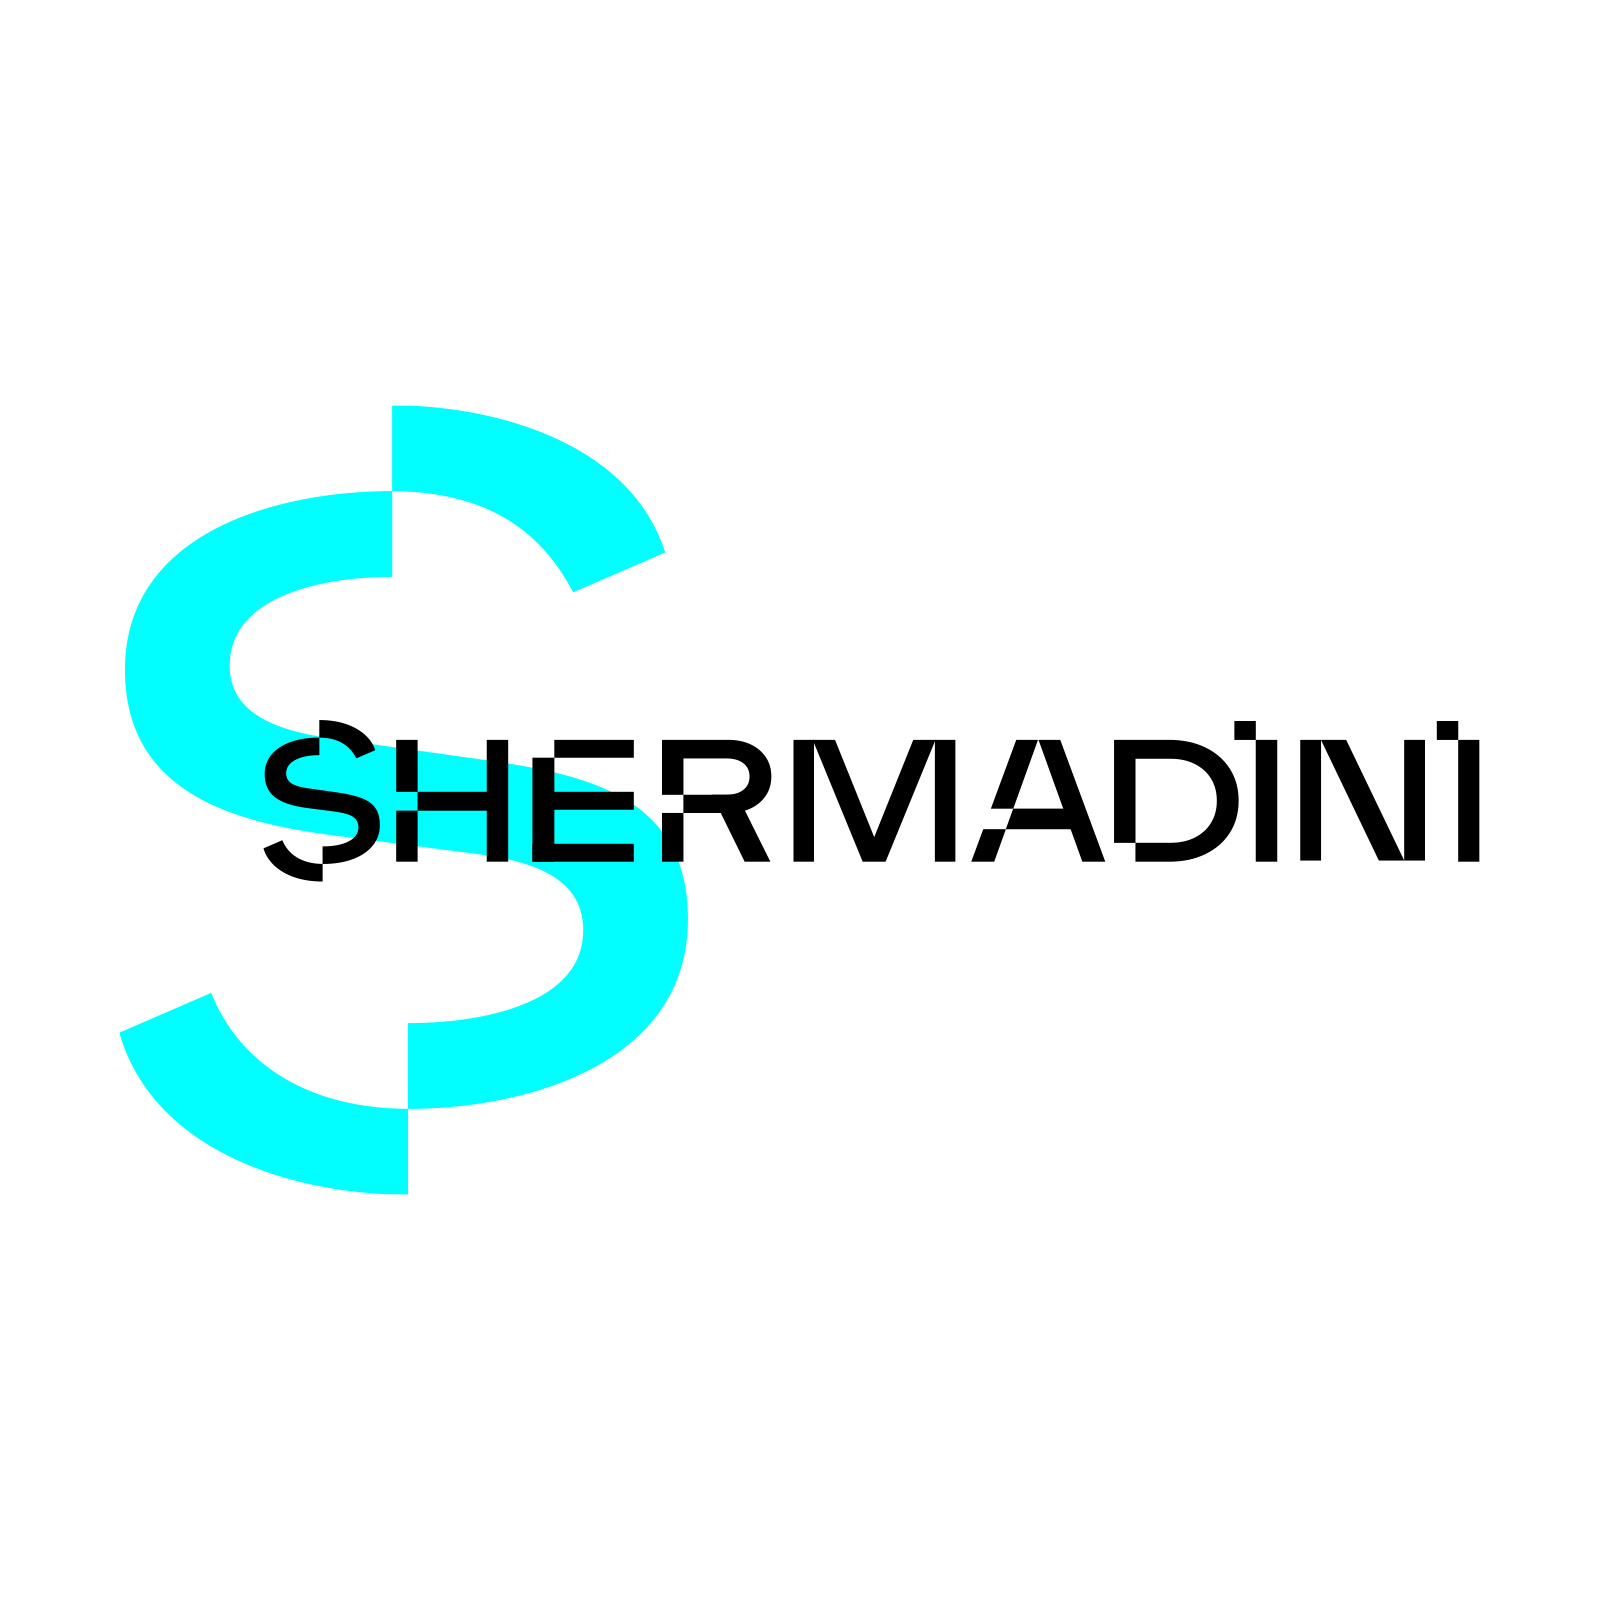 Shermadini logo design by logo designer Stanislav+Regis for your inspiration and for the worlds largest logo competition